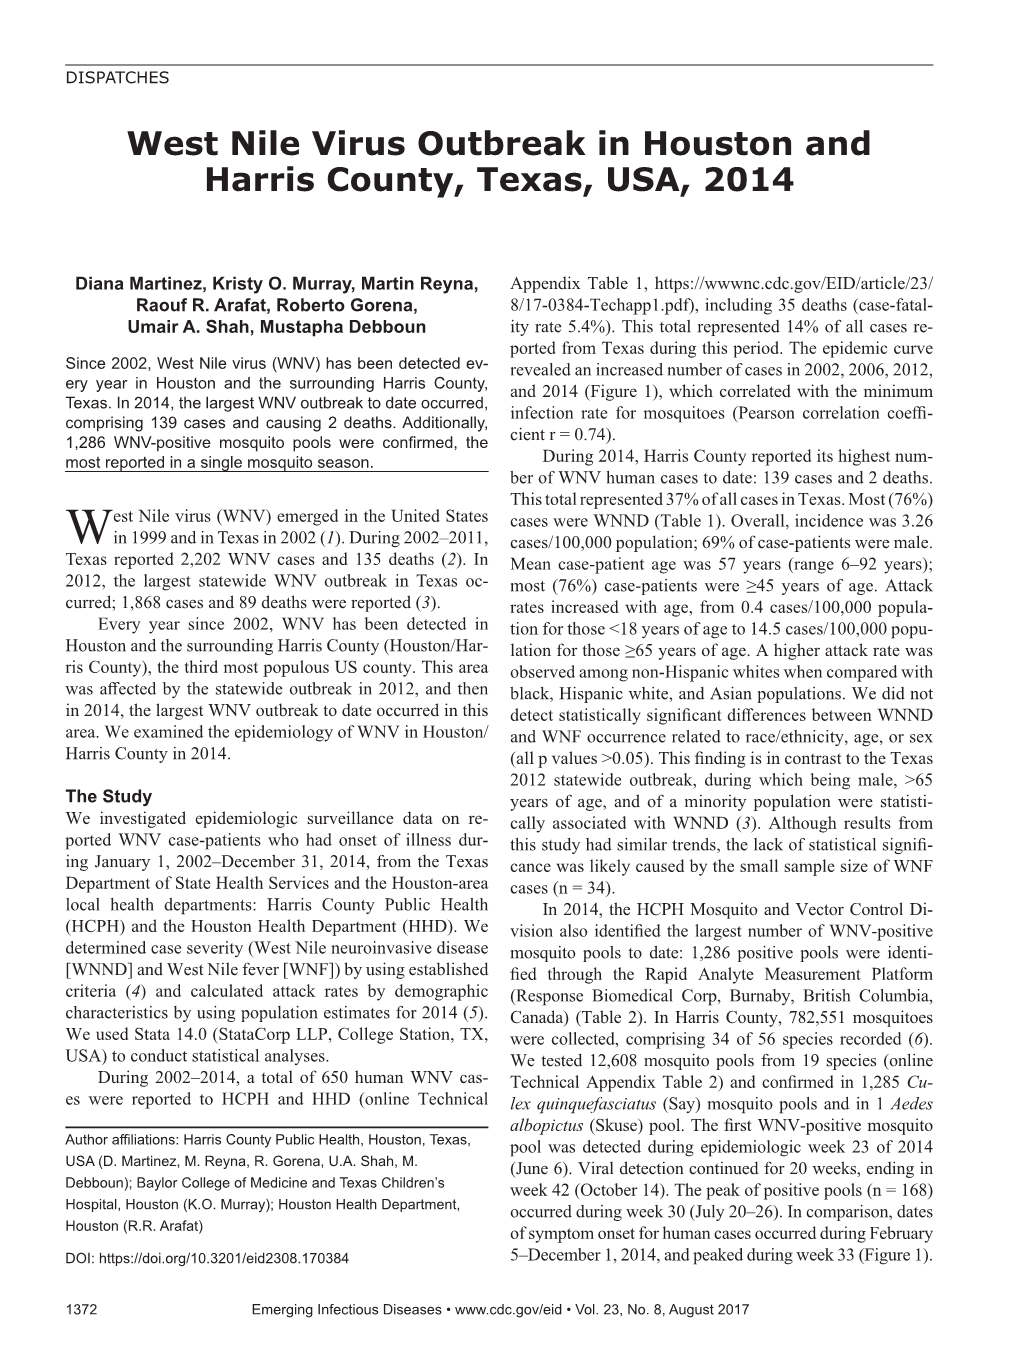 West Nile Virus Outbreak in Houston and Harris County, Texas, USA, 2014